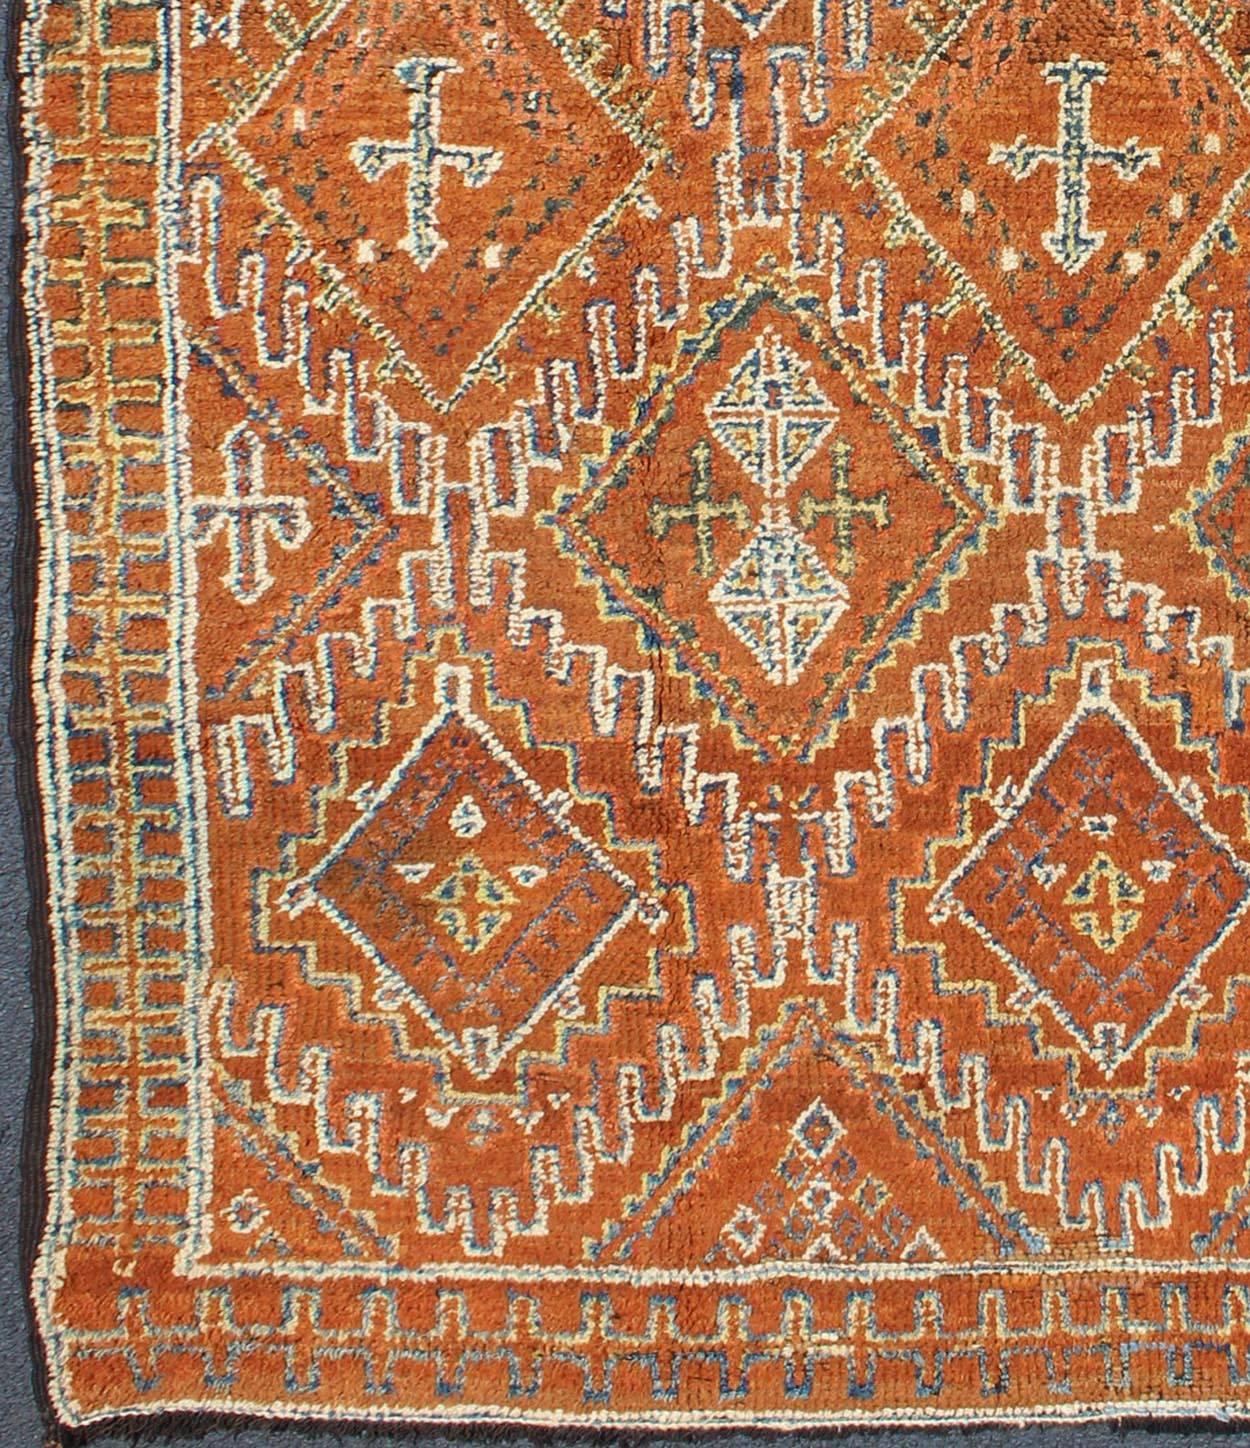 This magnificent Moroccan carpet is somewhat rare due to its early age. The rug is constructed with a soft wool pile in a lusciously saturated brown hue. An overall delicate pattern of diamond shapes cover the entire field in various soft colors